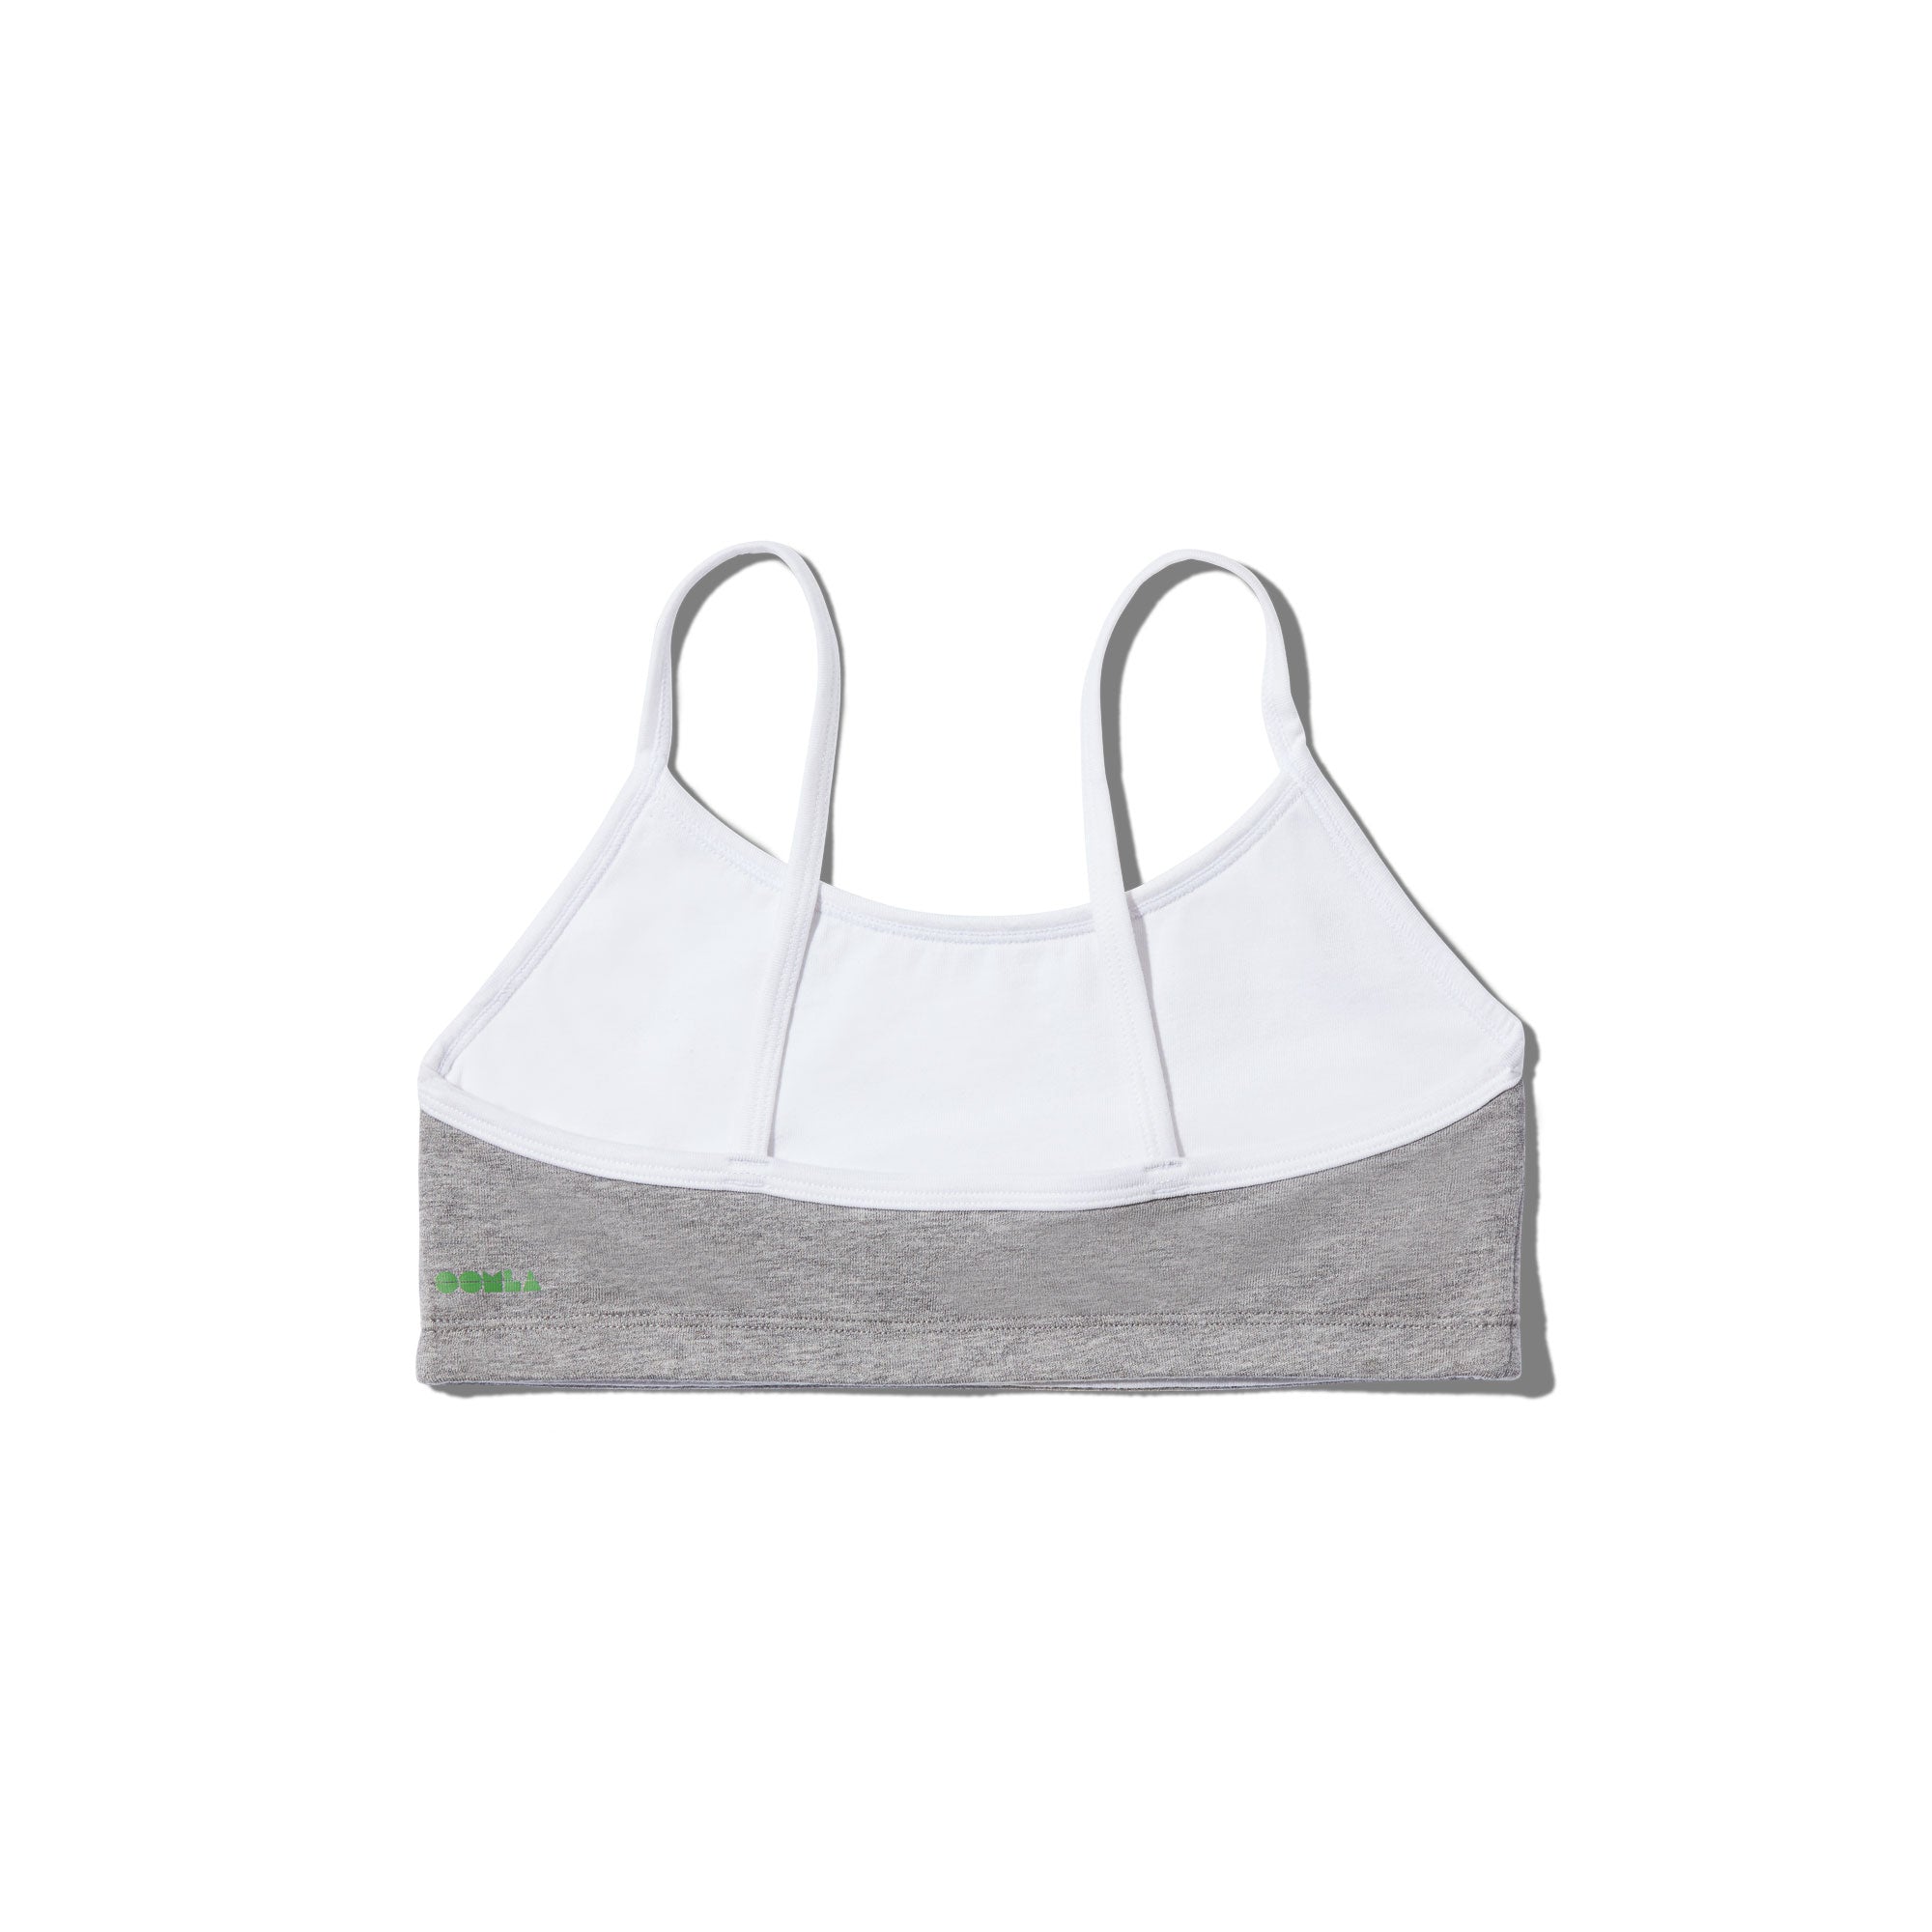 Softest bra ever for tweens & teens: cotton, reversible, and